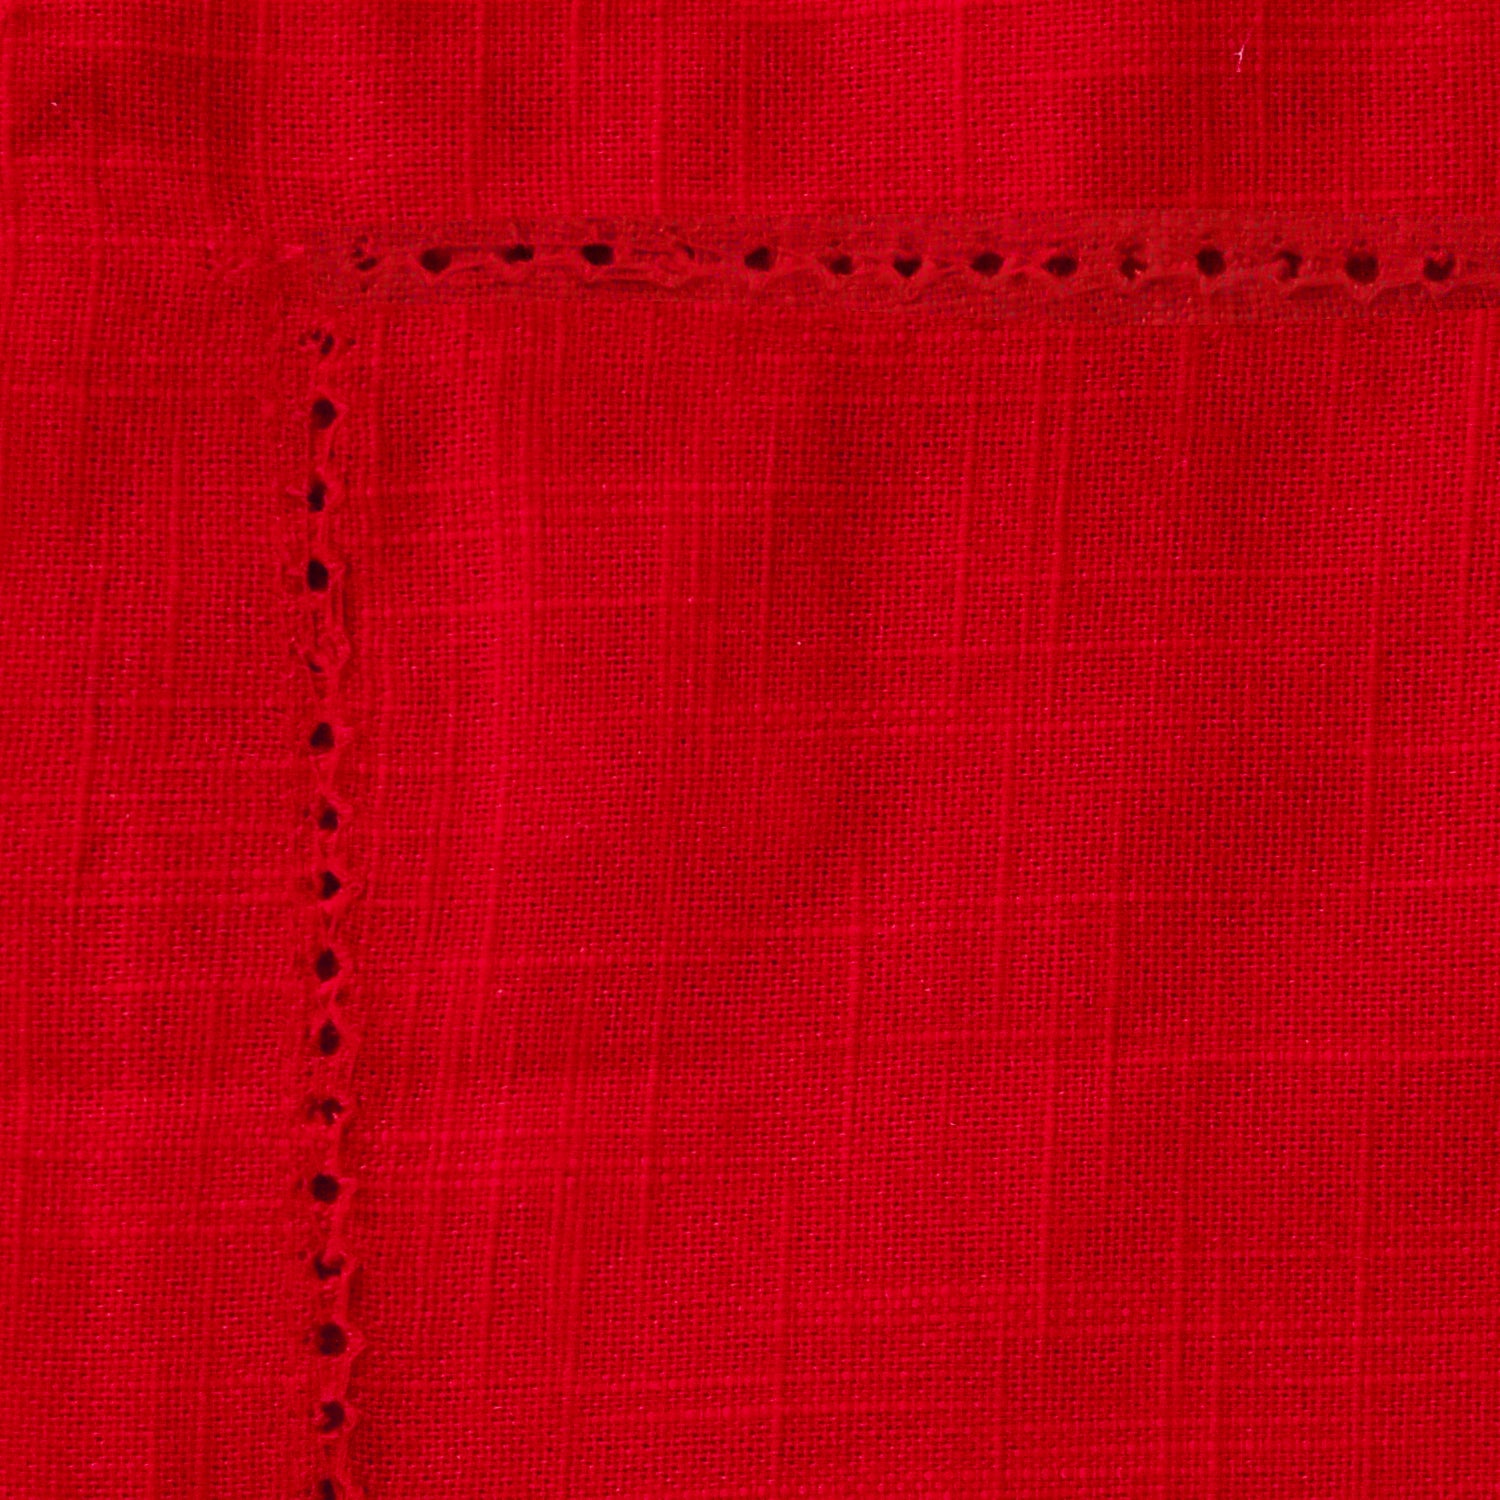 Cotton Tablecloths - Red tablecloth which are rectangular tablecloths